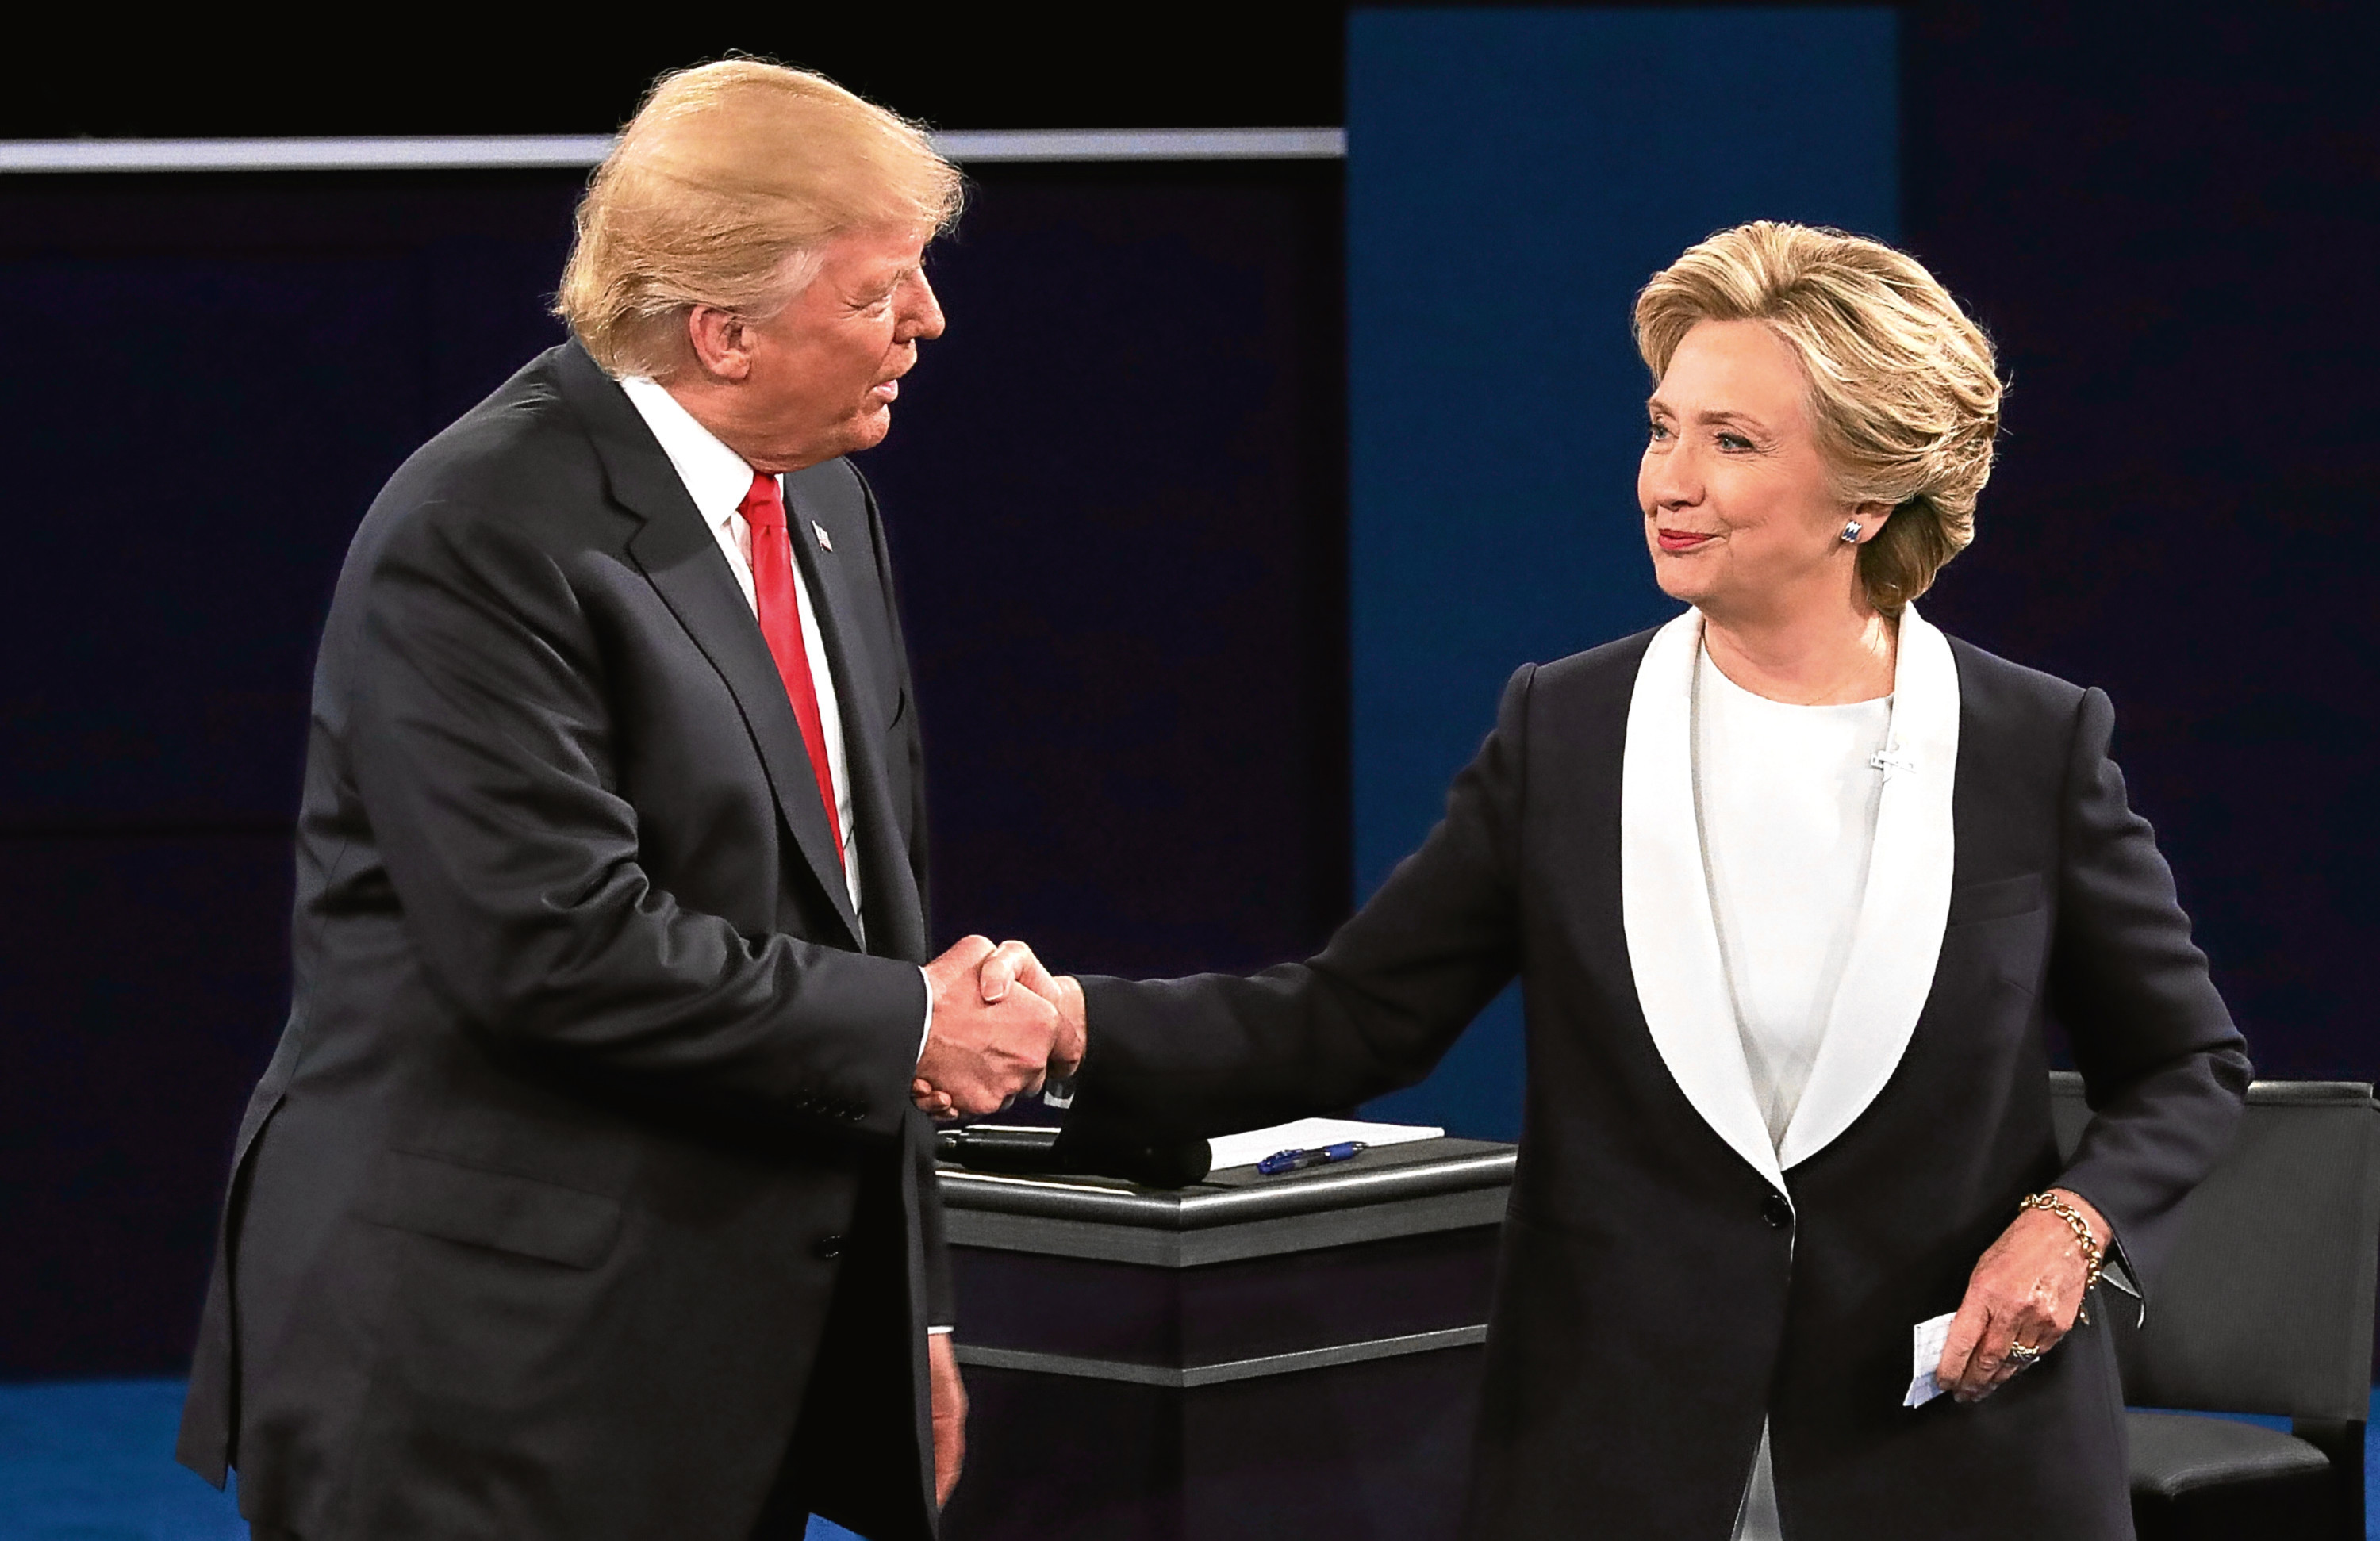 Donald Trump shakes hands with Hillary Clinton (Chip Somodevilla/Getty Images)